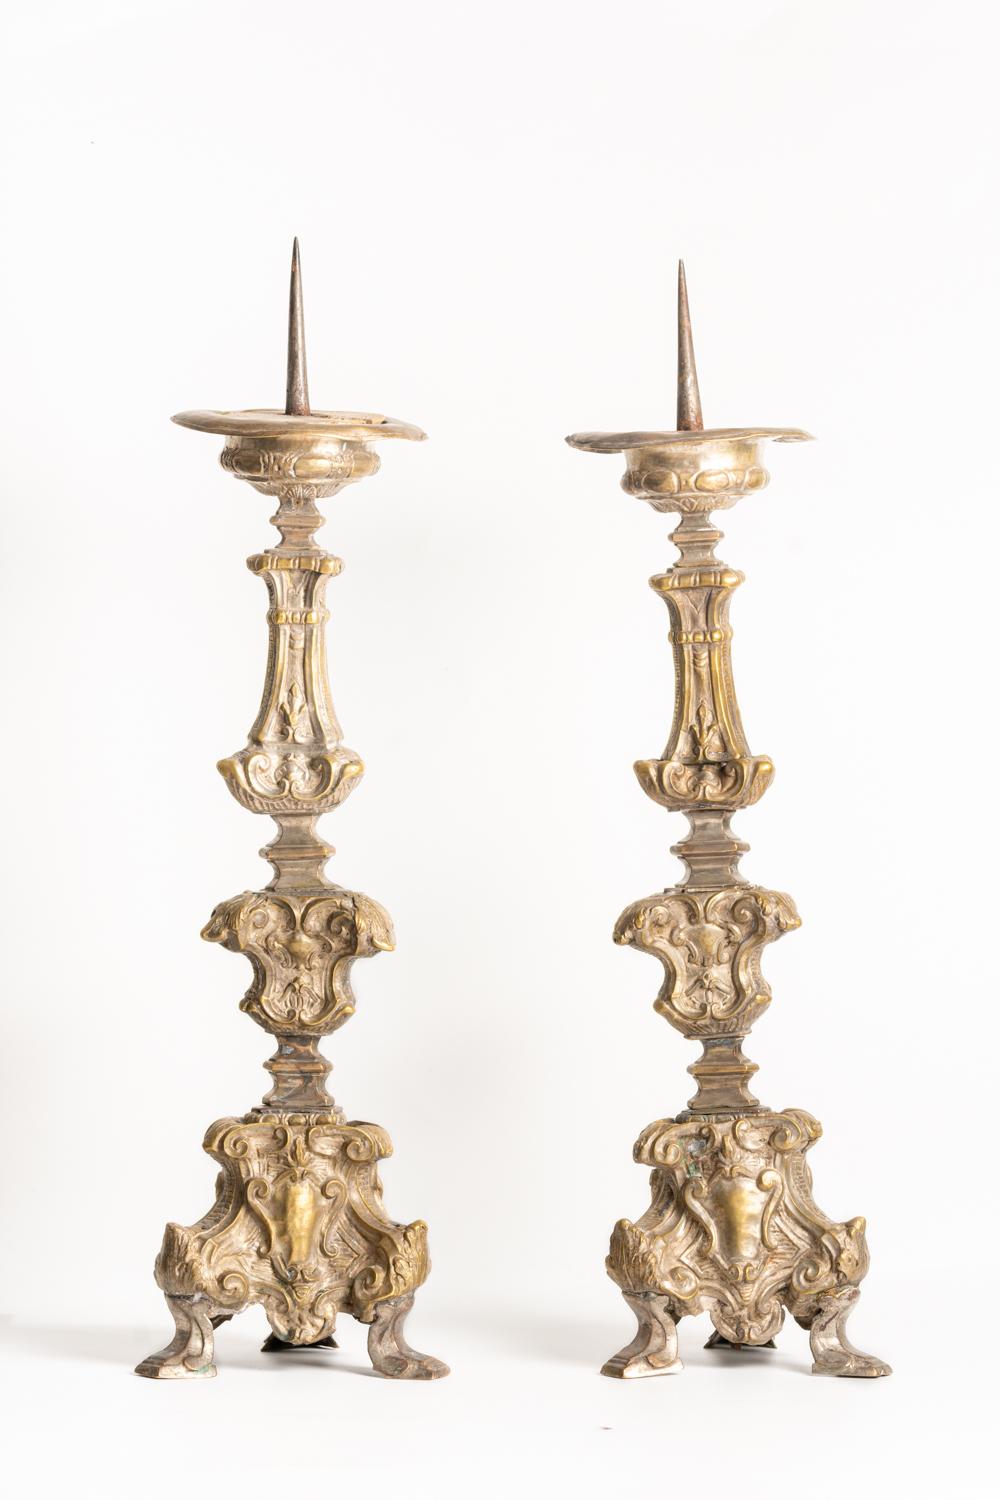 A fine pair of 18th century Italian brass pricket candlesticks impressively decorated in a baroque style with knopped stems and triform bases decorated with cartouche and foliage alterations. The columns are beautifully ornated on each side with